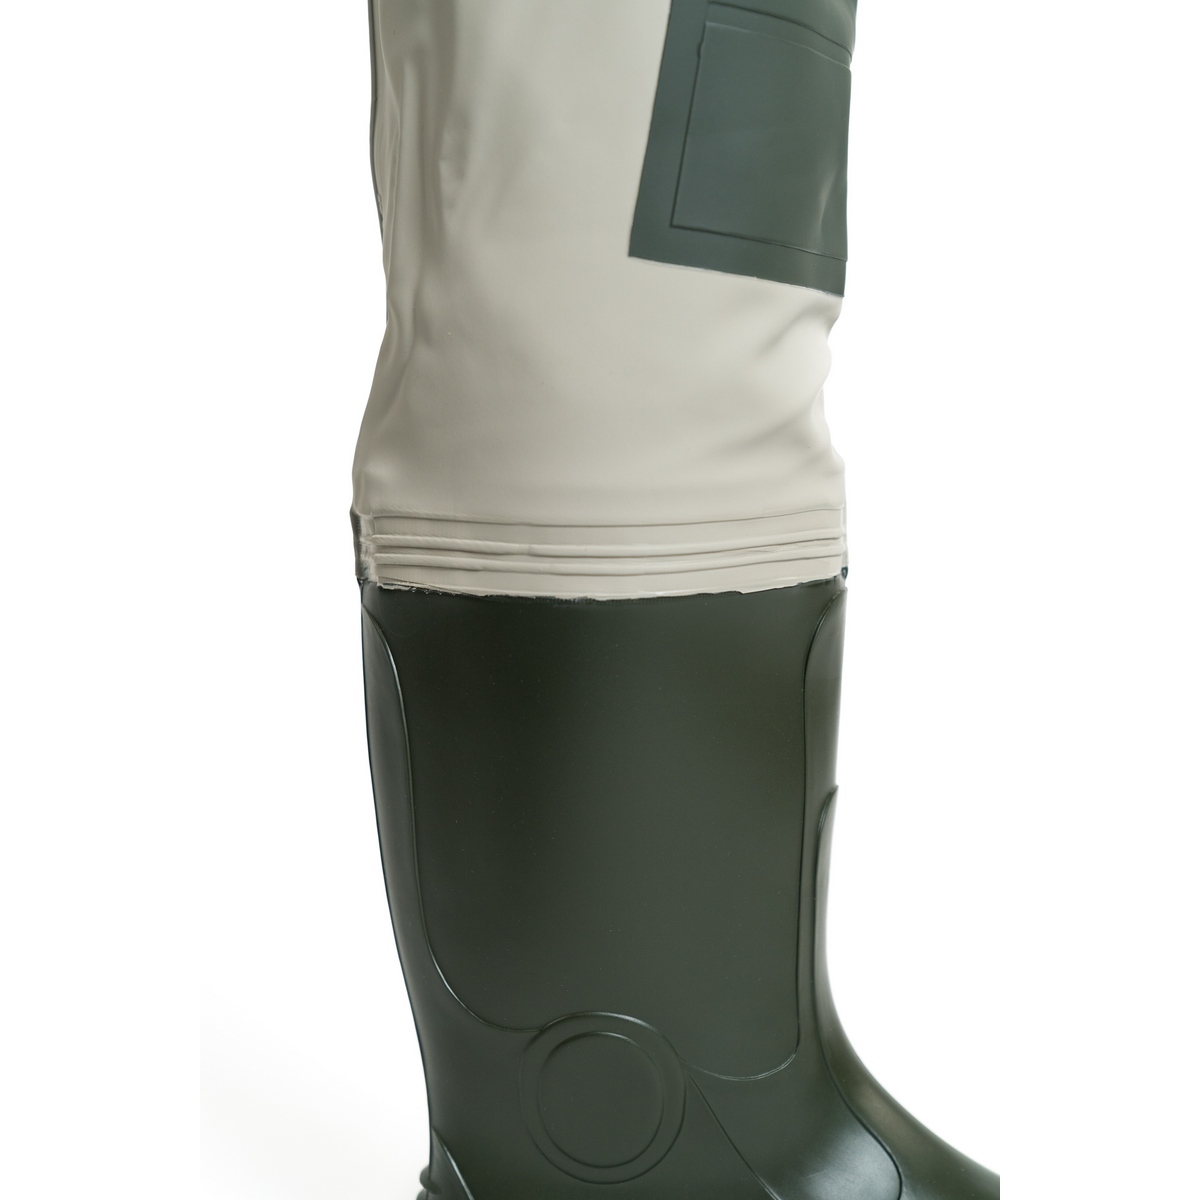 Goodyear Cuissarde Sport Thigh Waders